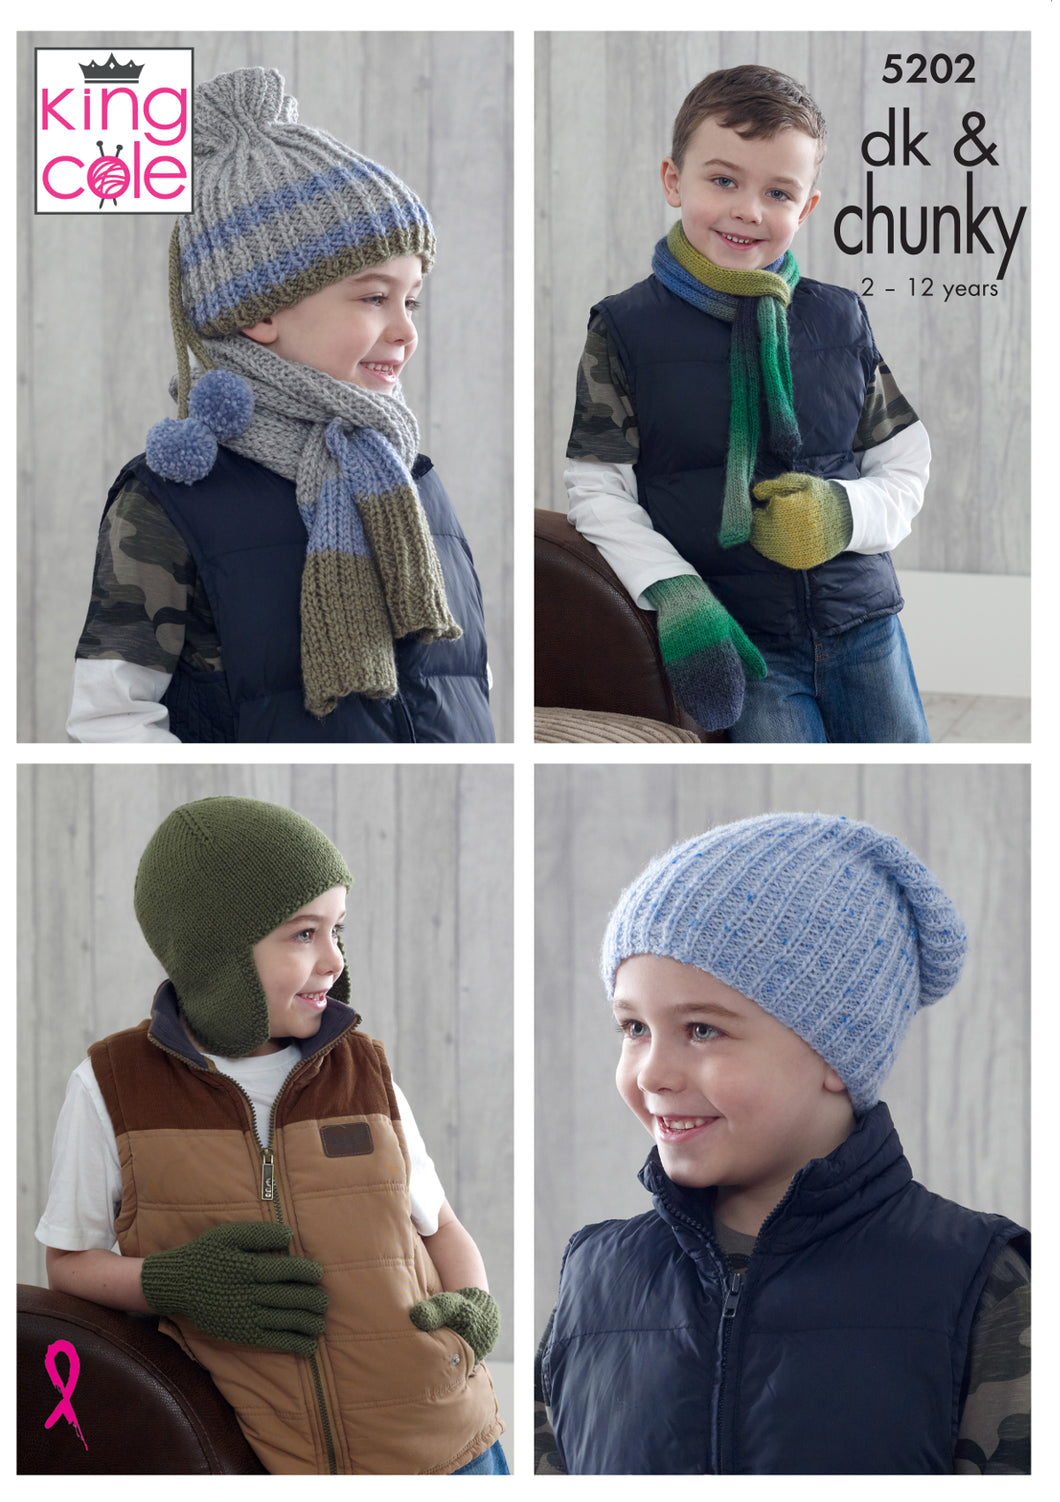 King Cole DK & Chunky Knitting Pattern - Boys Accessories (5202)